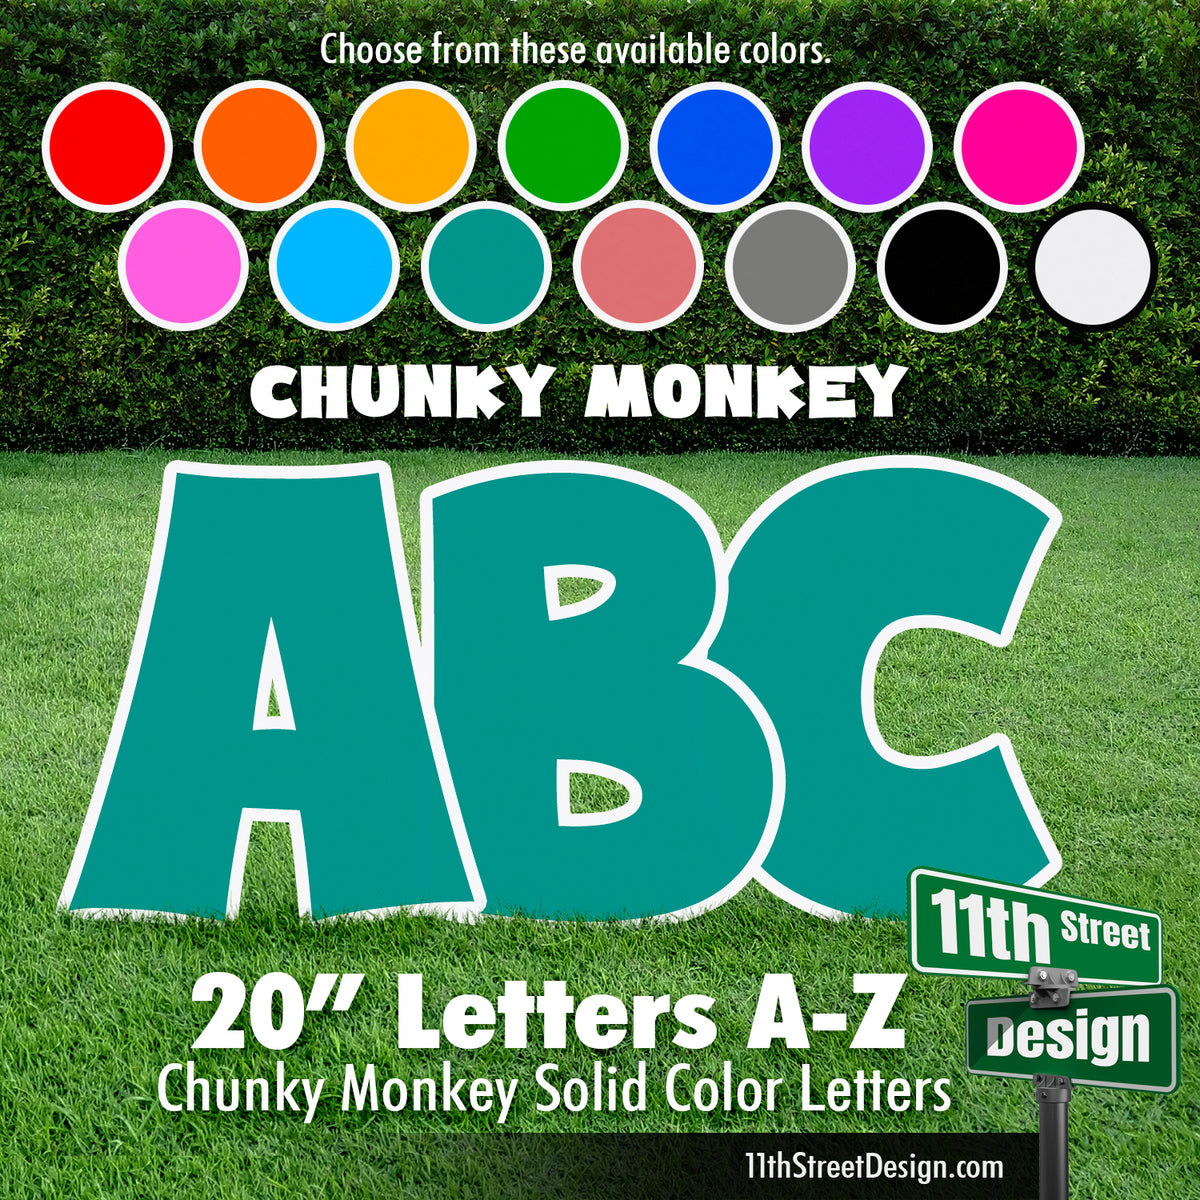 Solid Color 20&quot; Chunky Monkey 26 Letter Alphabet Yard Card Set Includes Letters A-Z